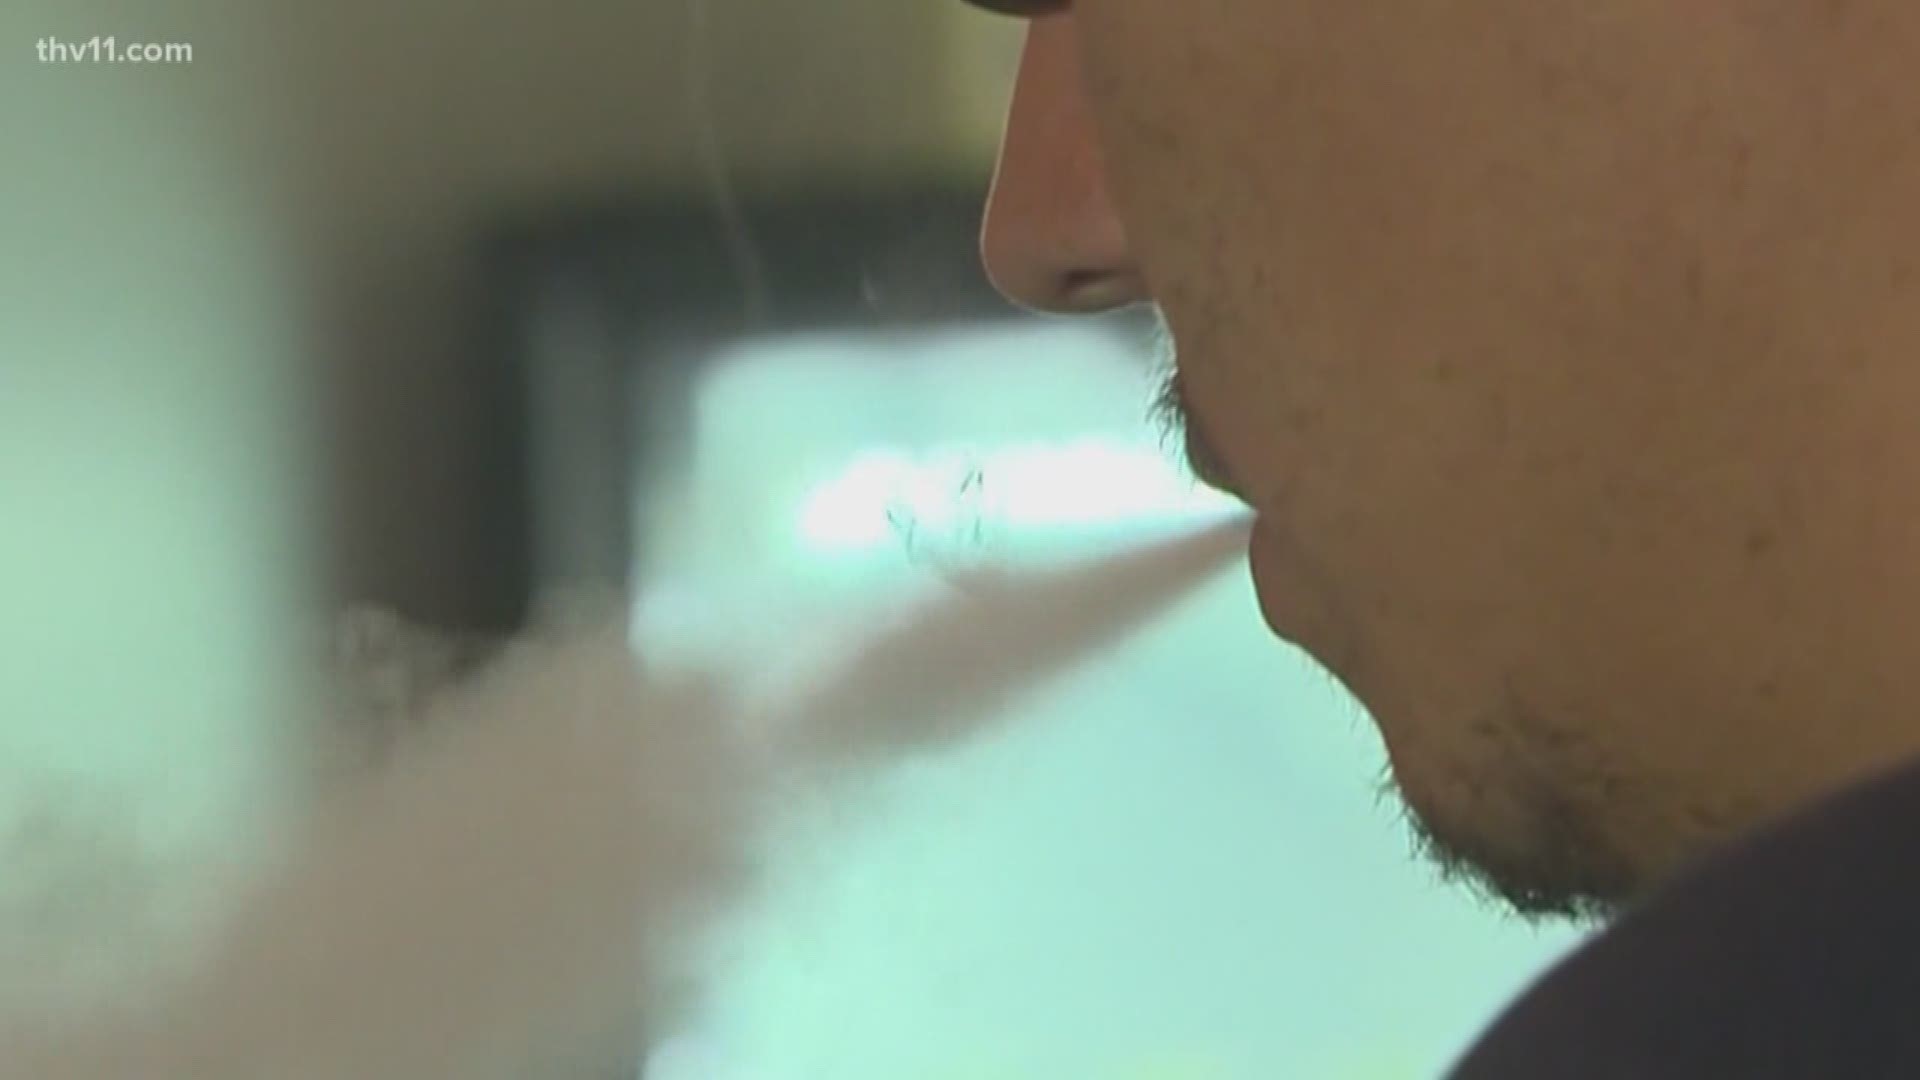 Arkansas health officials say unless you are using e-cigarettes to wean off your nicotine use entirely, you could be in danger.